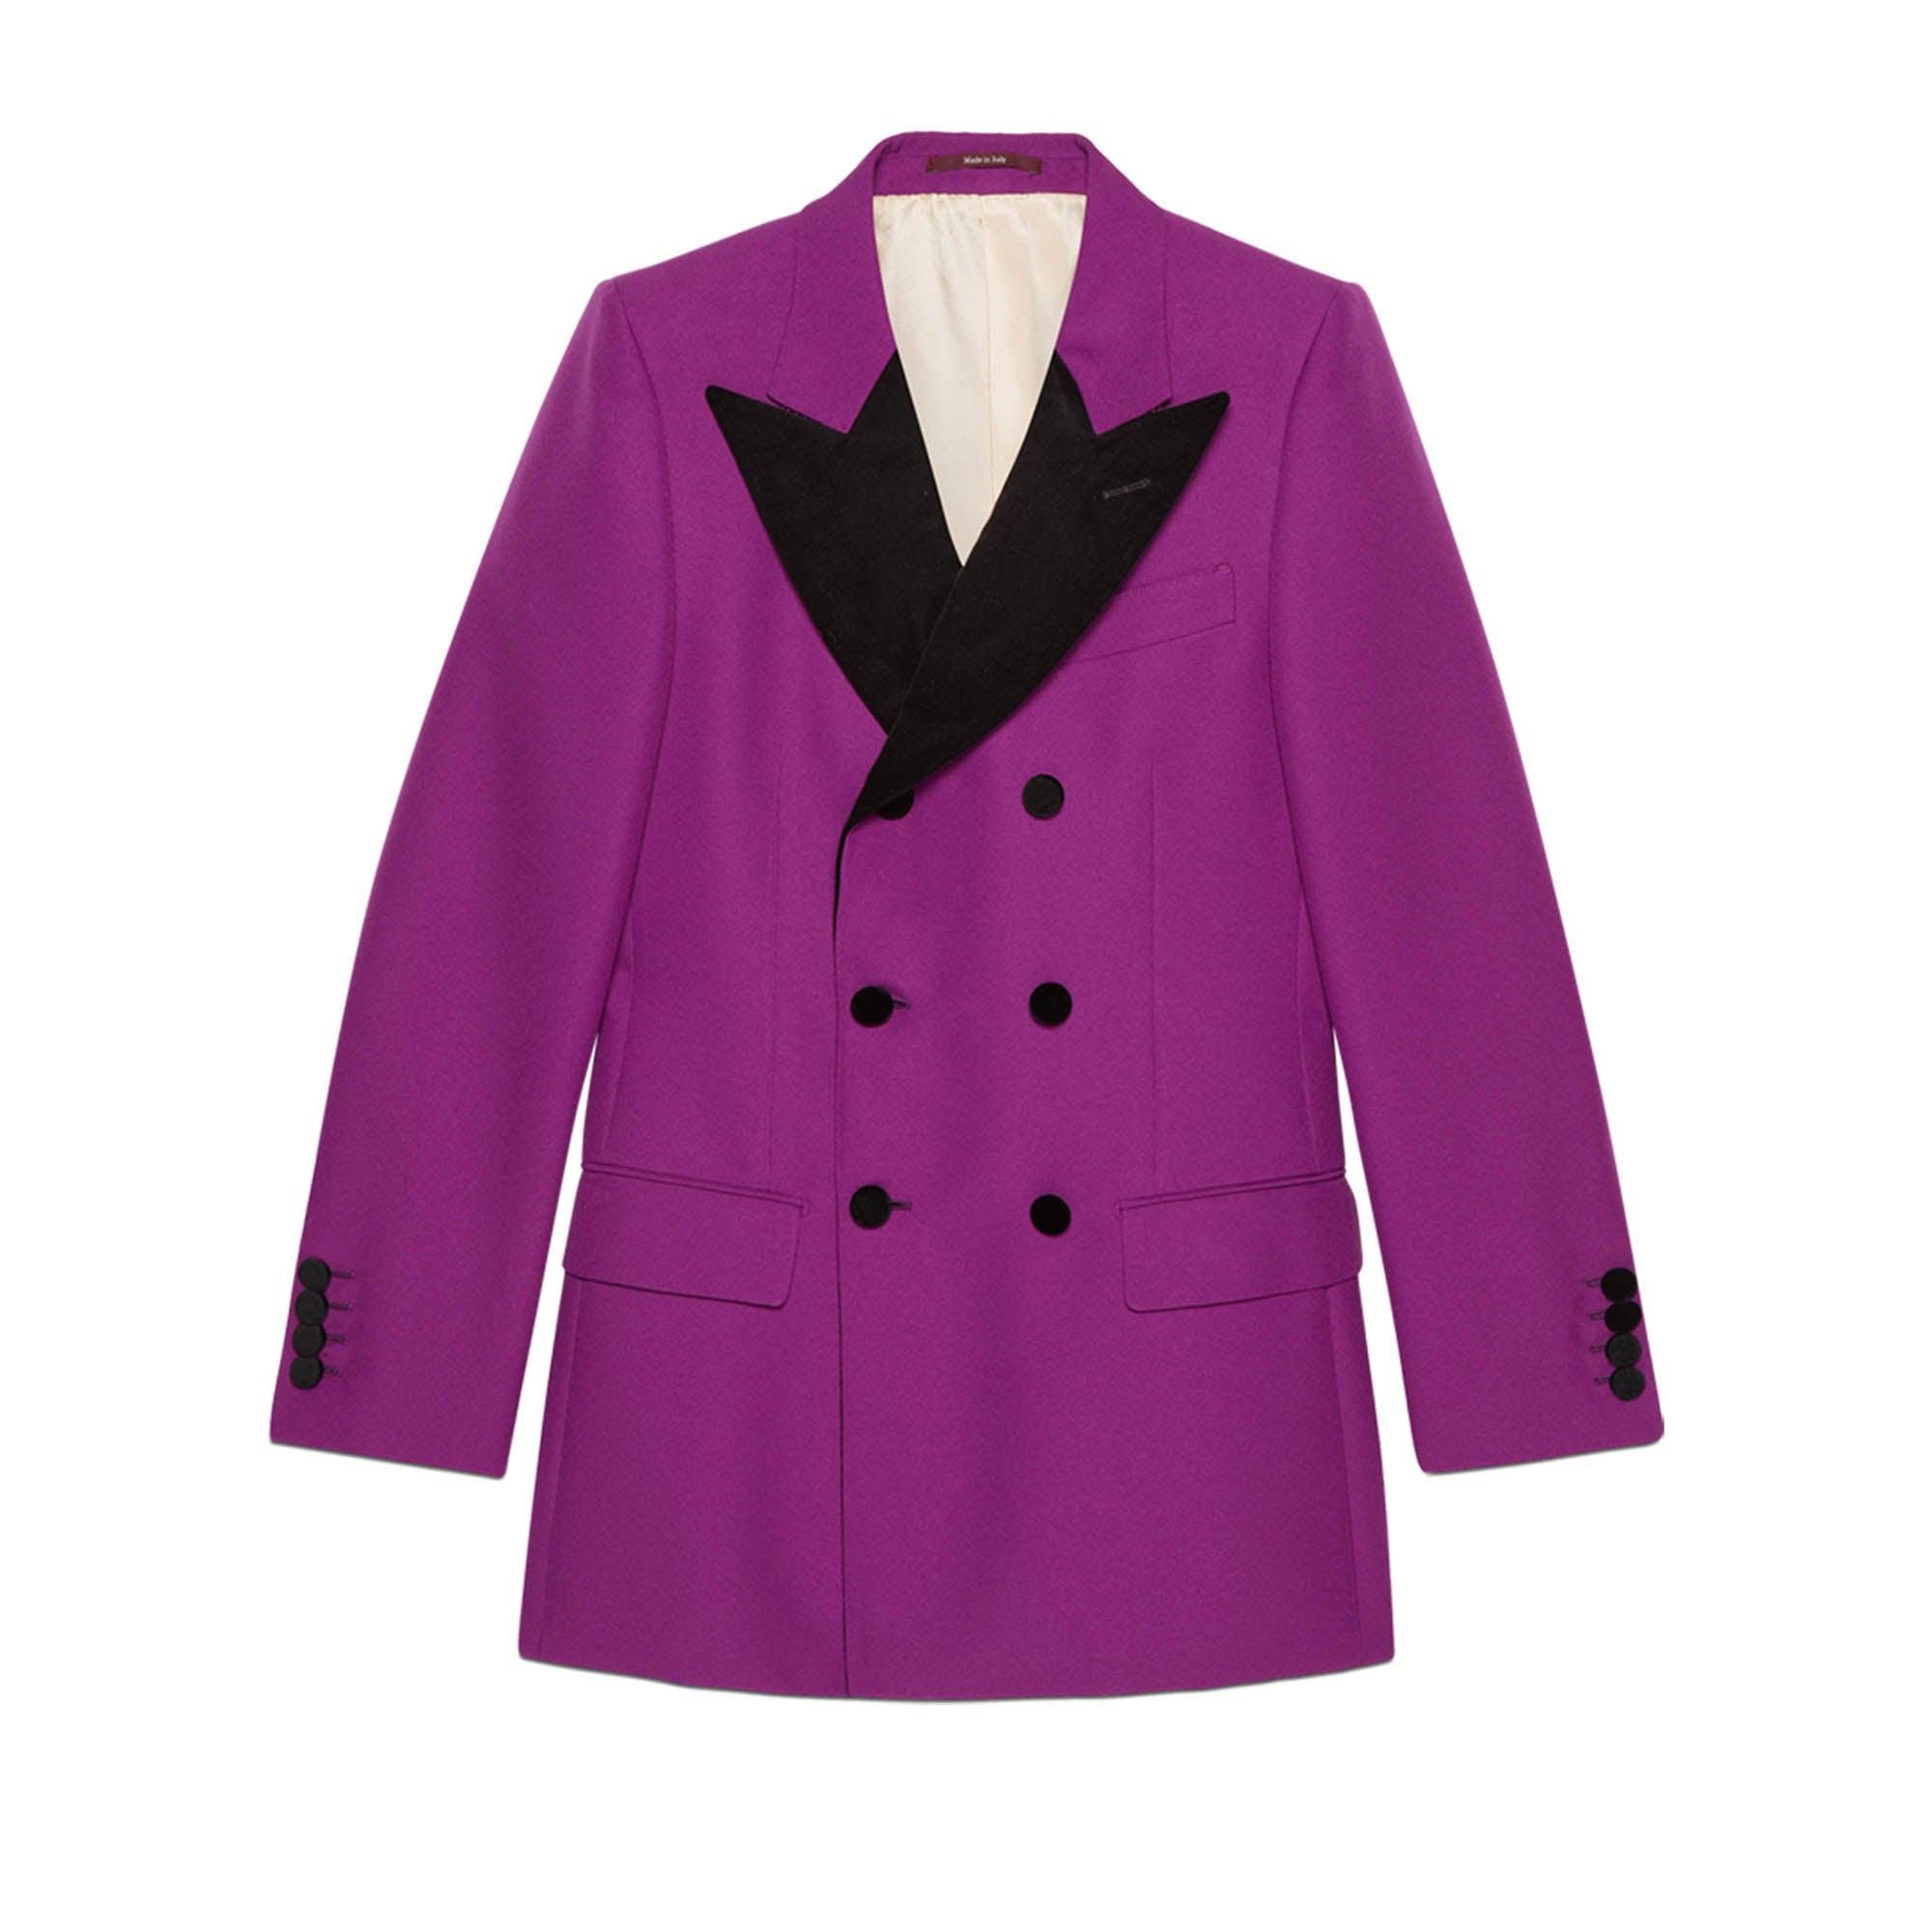 Gucci - Men’s Formal Jacket - (Bright Violet) by GUCCI | jellibeans